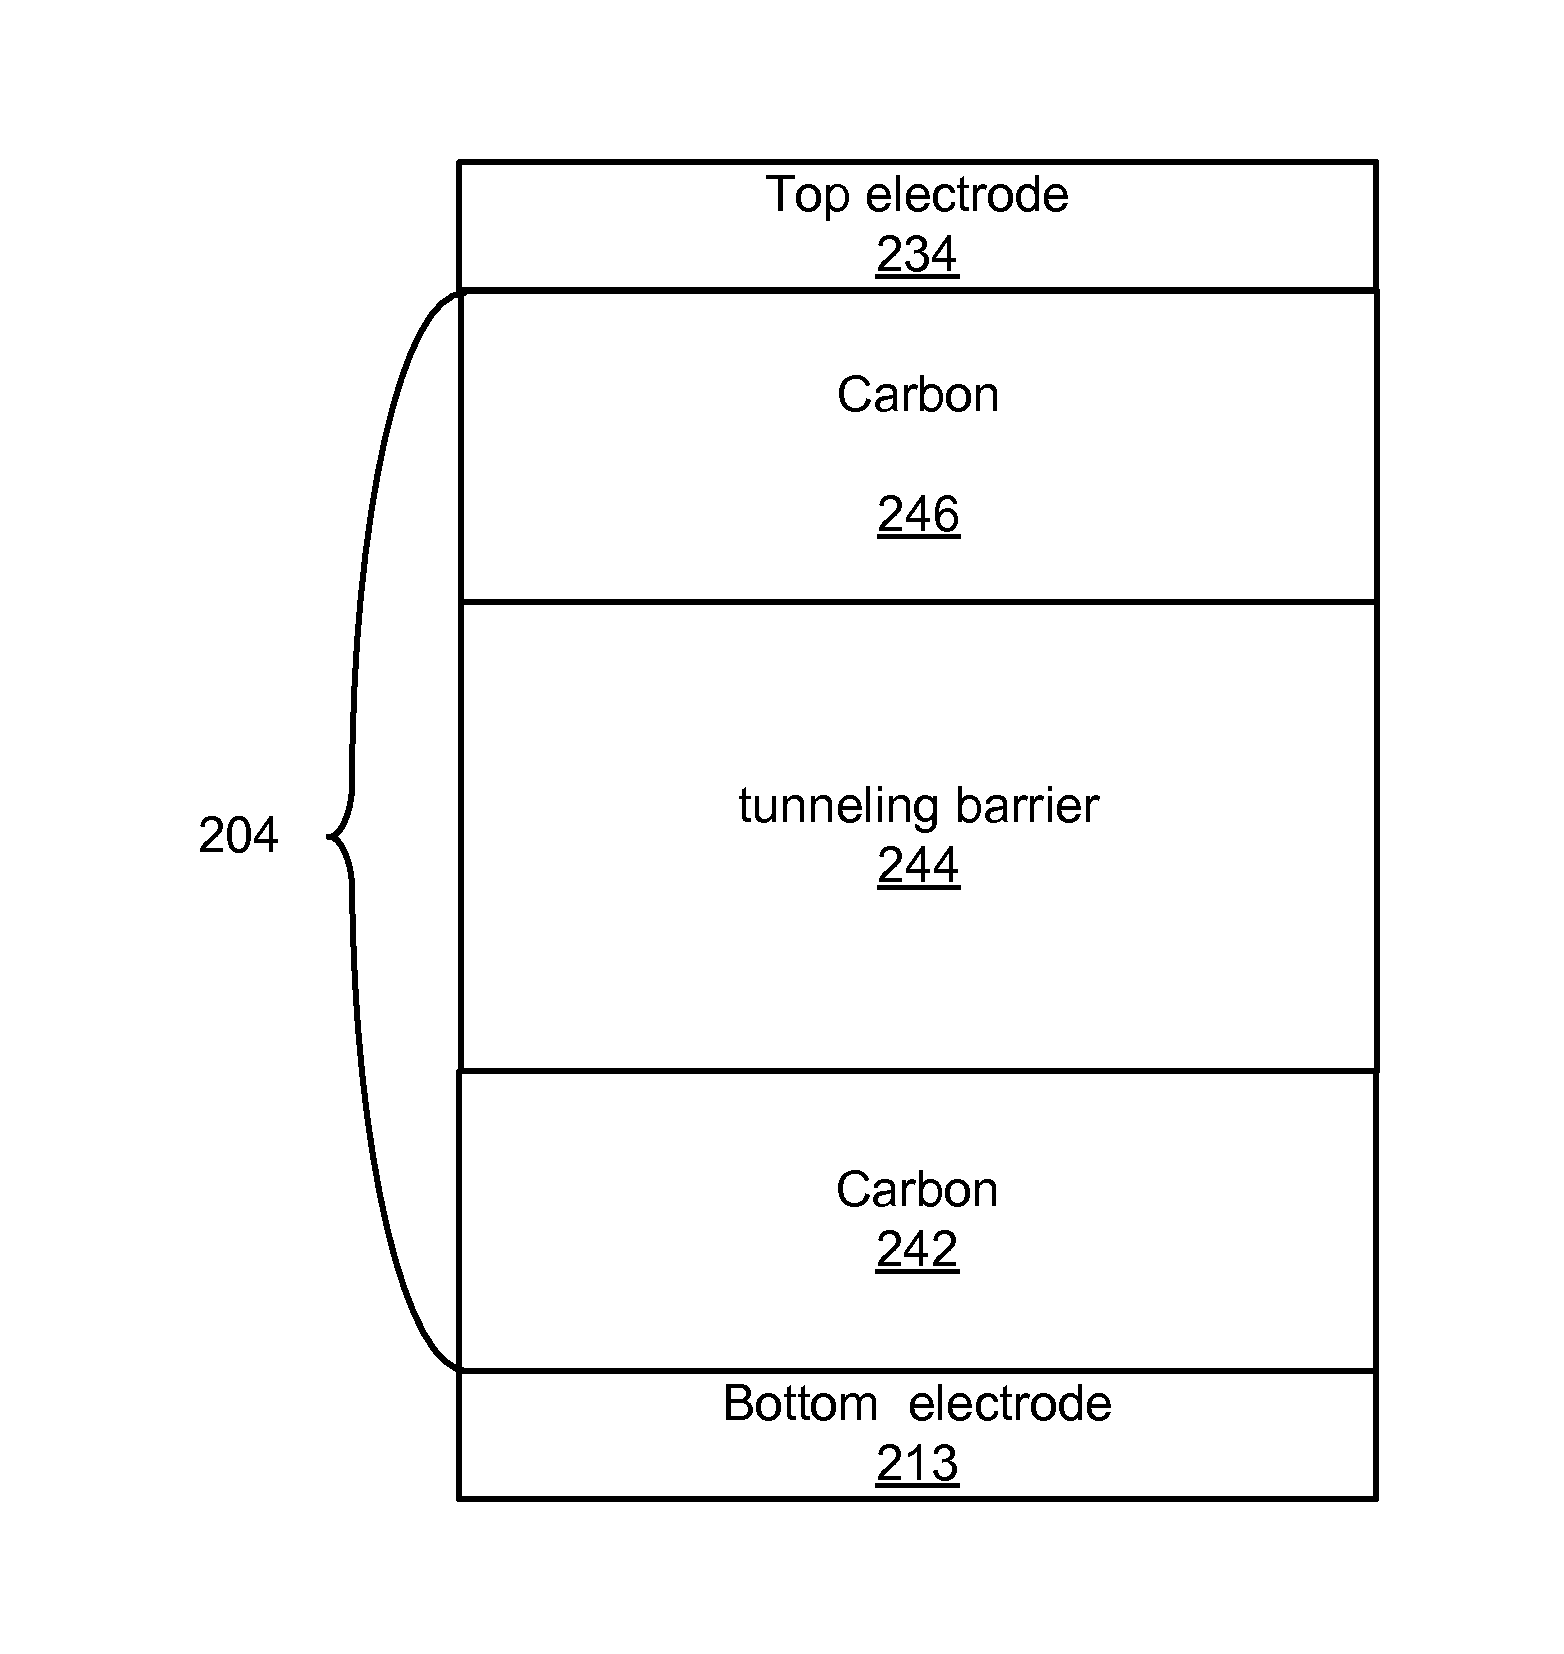 Carbon/tunneling-barrier/carbon diode